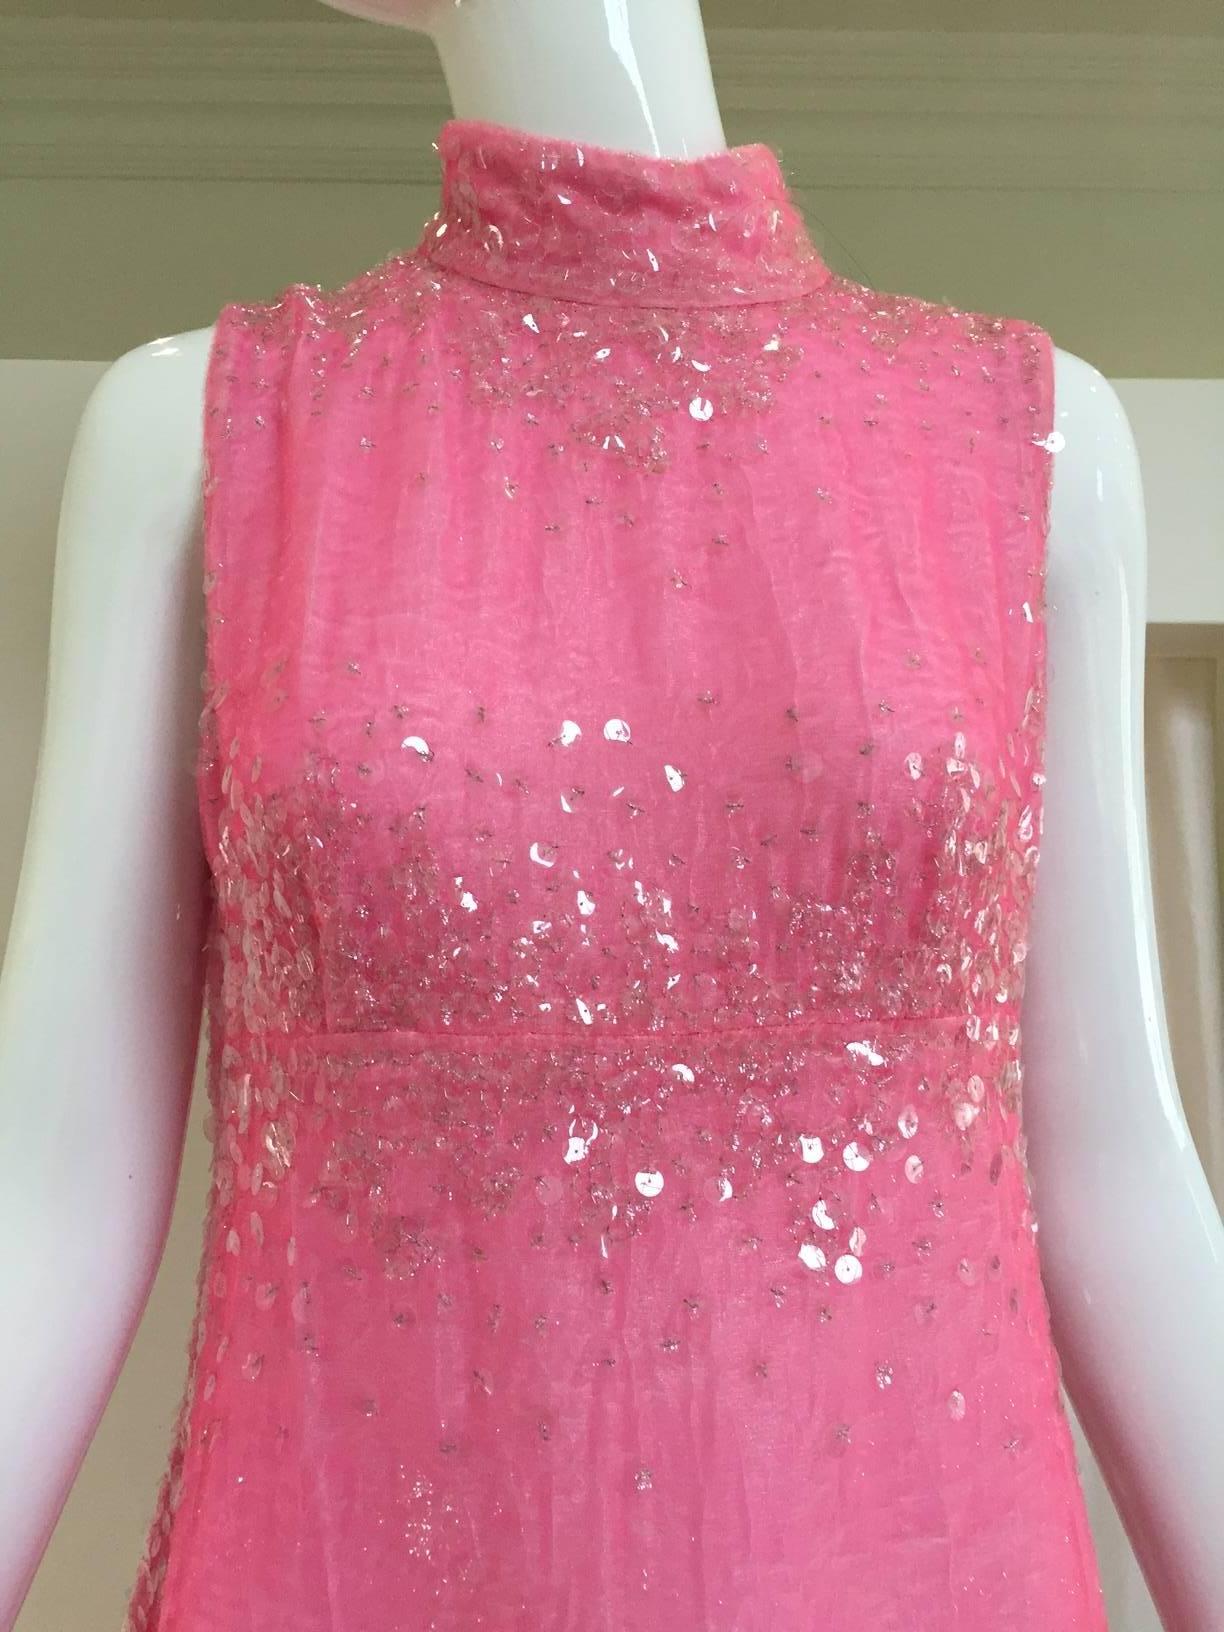 This stunning Chanel gown has a mock collar that is secured by 3 clear Lucite signature “CC” buttons on the nape of the neck.  The collar, shoulders, bust and hemline are all highlighted with shimmering sequins that also flow down the edges of the